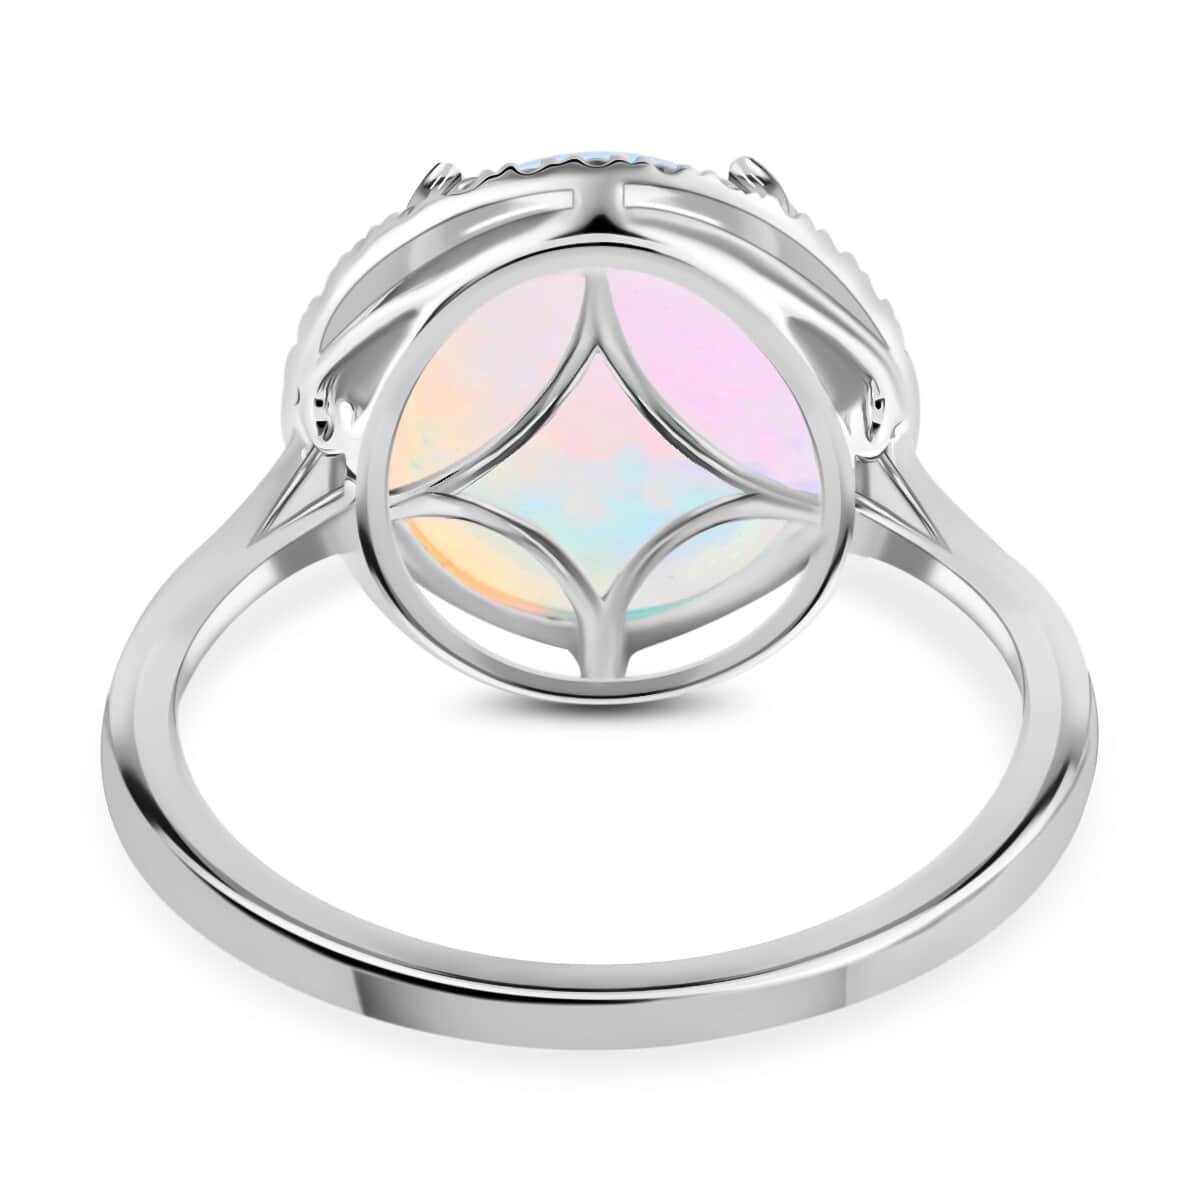 Inspired by a halo design, this AAA Ethiopian Welo Opal ring symbolizes sanctity and perfection. Halo rings are popular throughout history for their uniqueness in illuminating the gemstone i image number 4